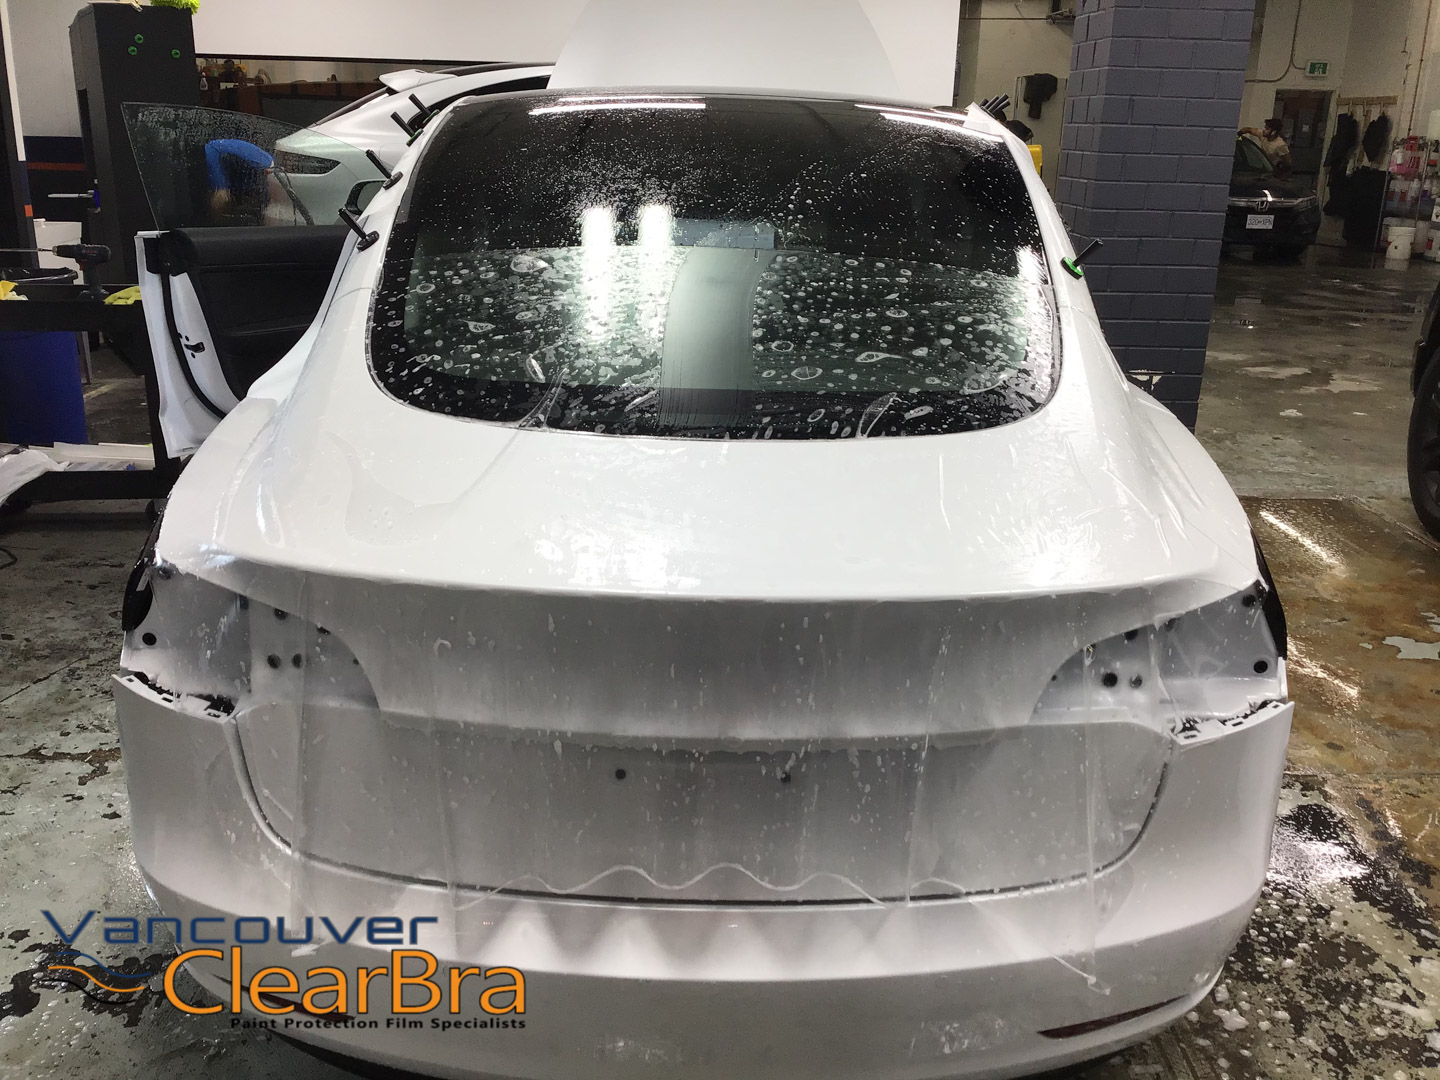 xpel-ultimate-xpel-stealth-clear-bra-paint-protection-film-Vancouver-ClearBra-2349.jpg